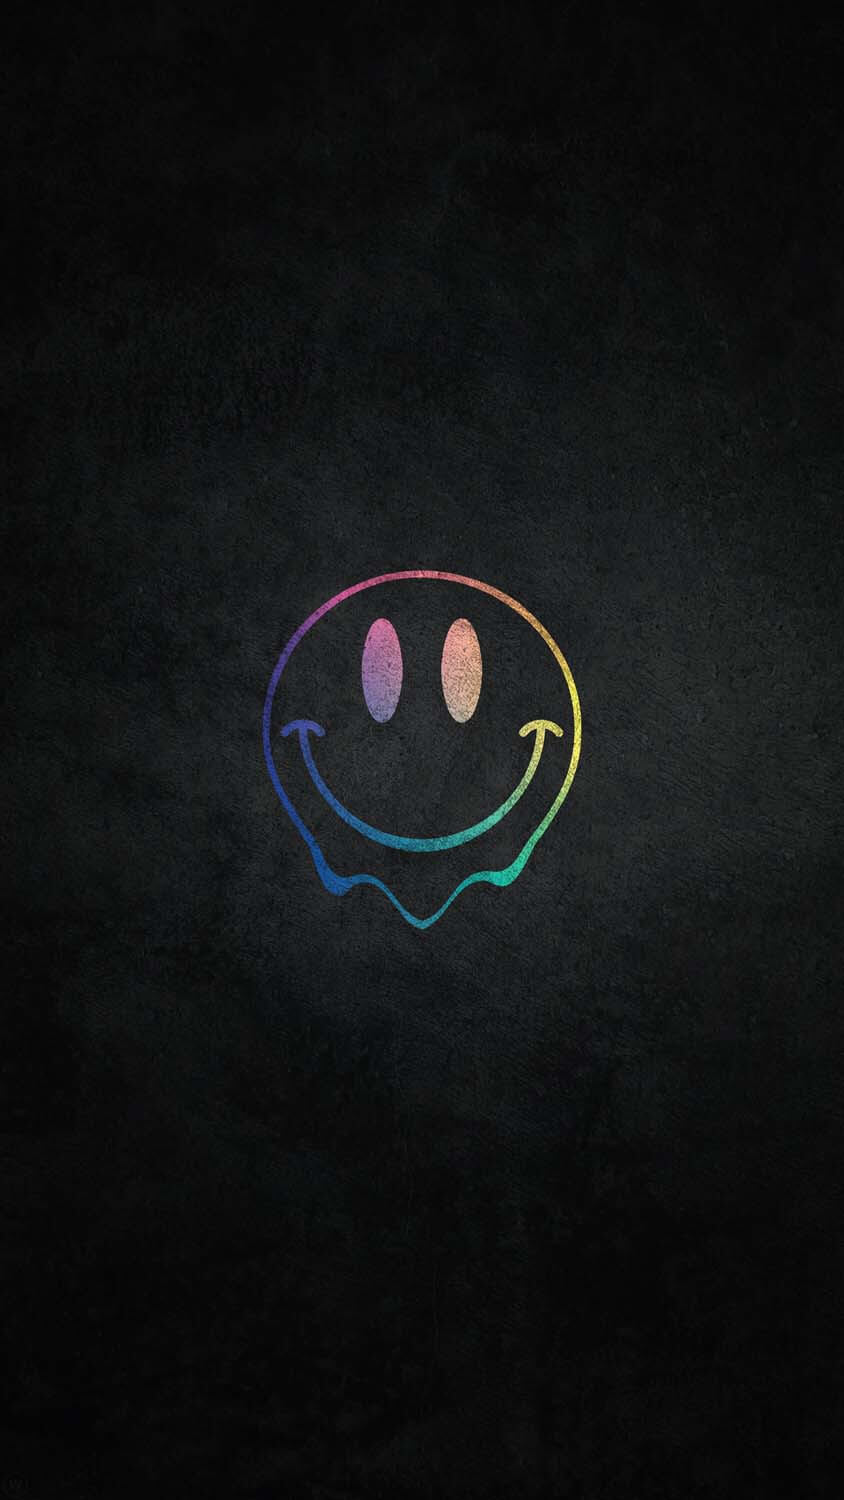 Wallpaper ID 787815  spaceman background 1920a smiley black face  1080P free download